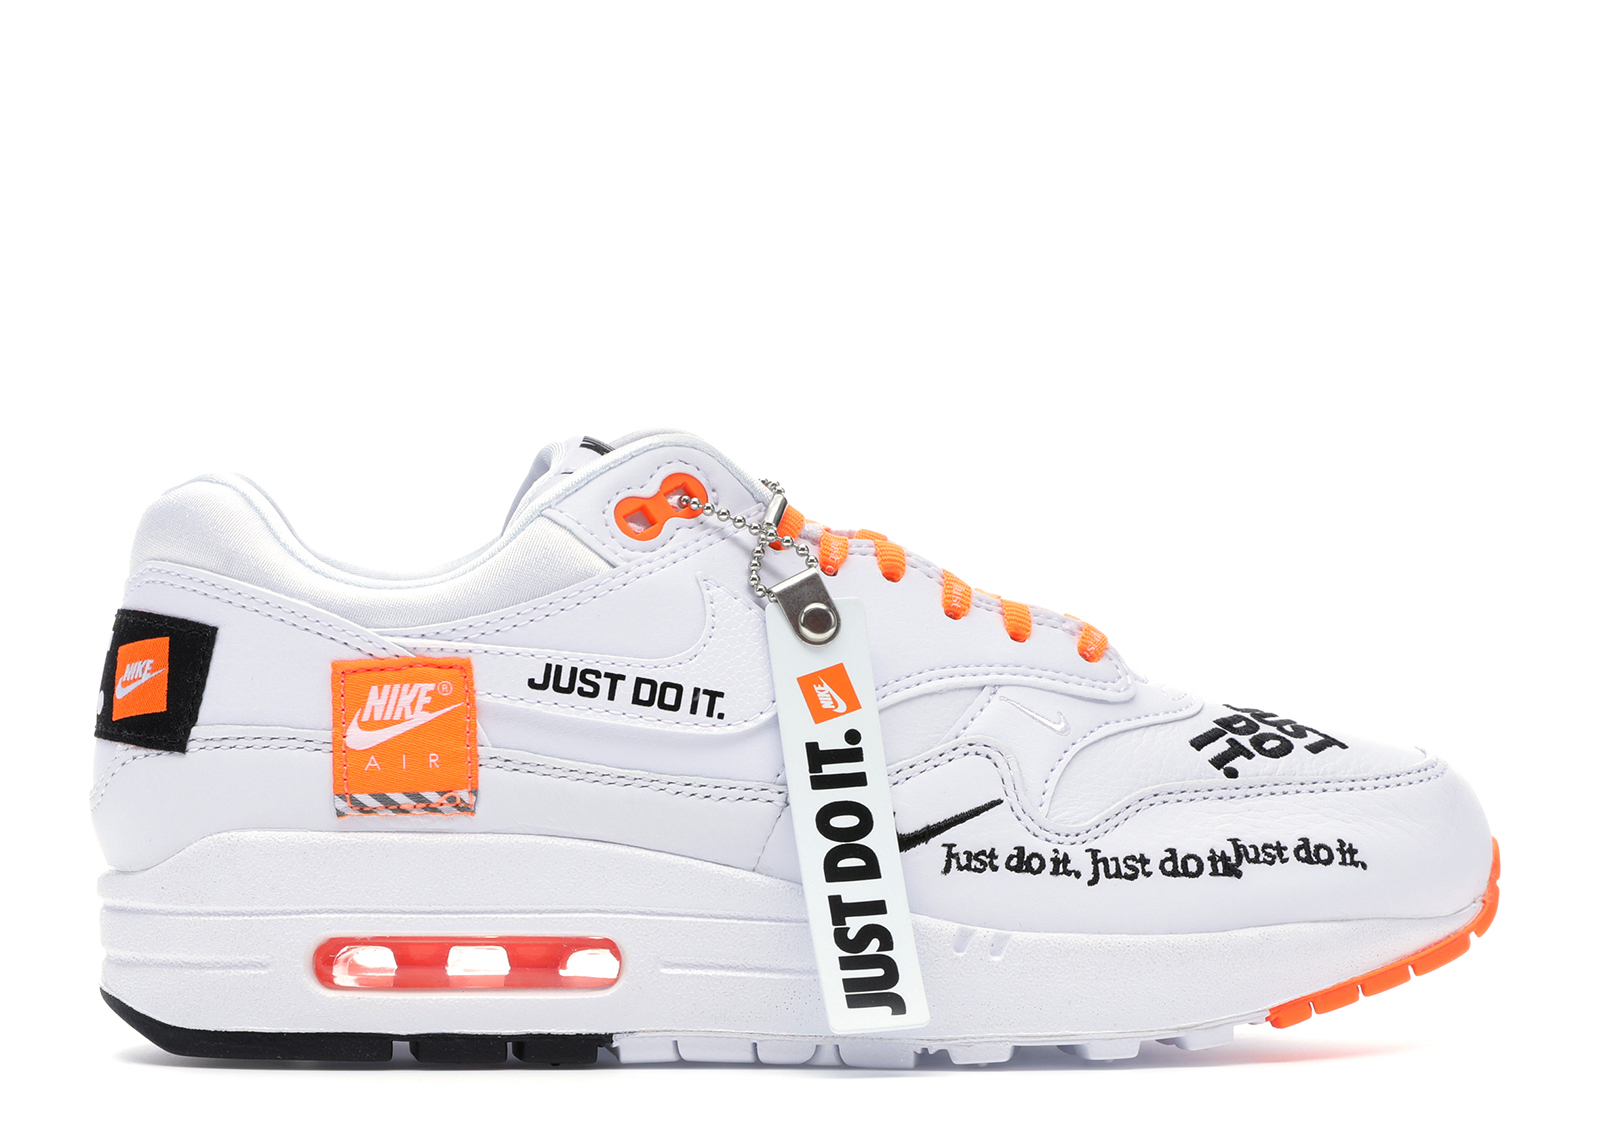 Nike Air Max 1 Just Do It White (W) - 917691-100 - US